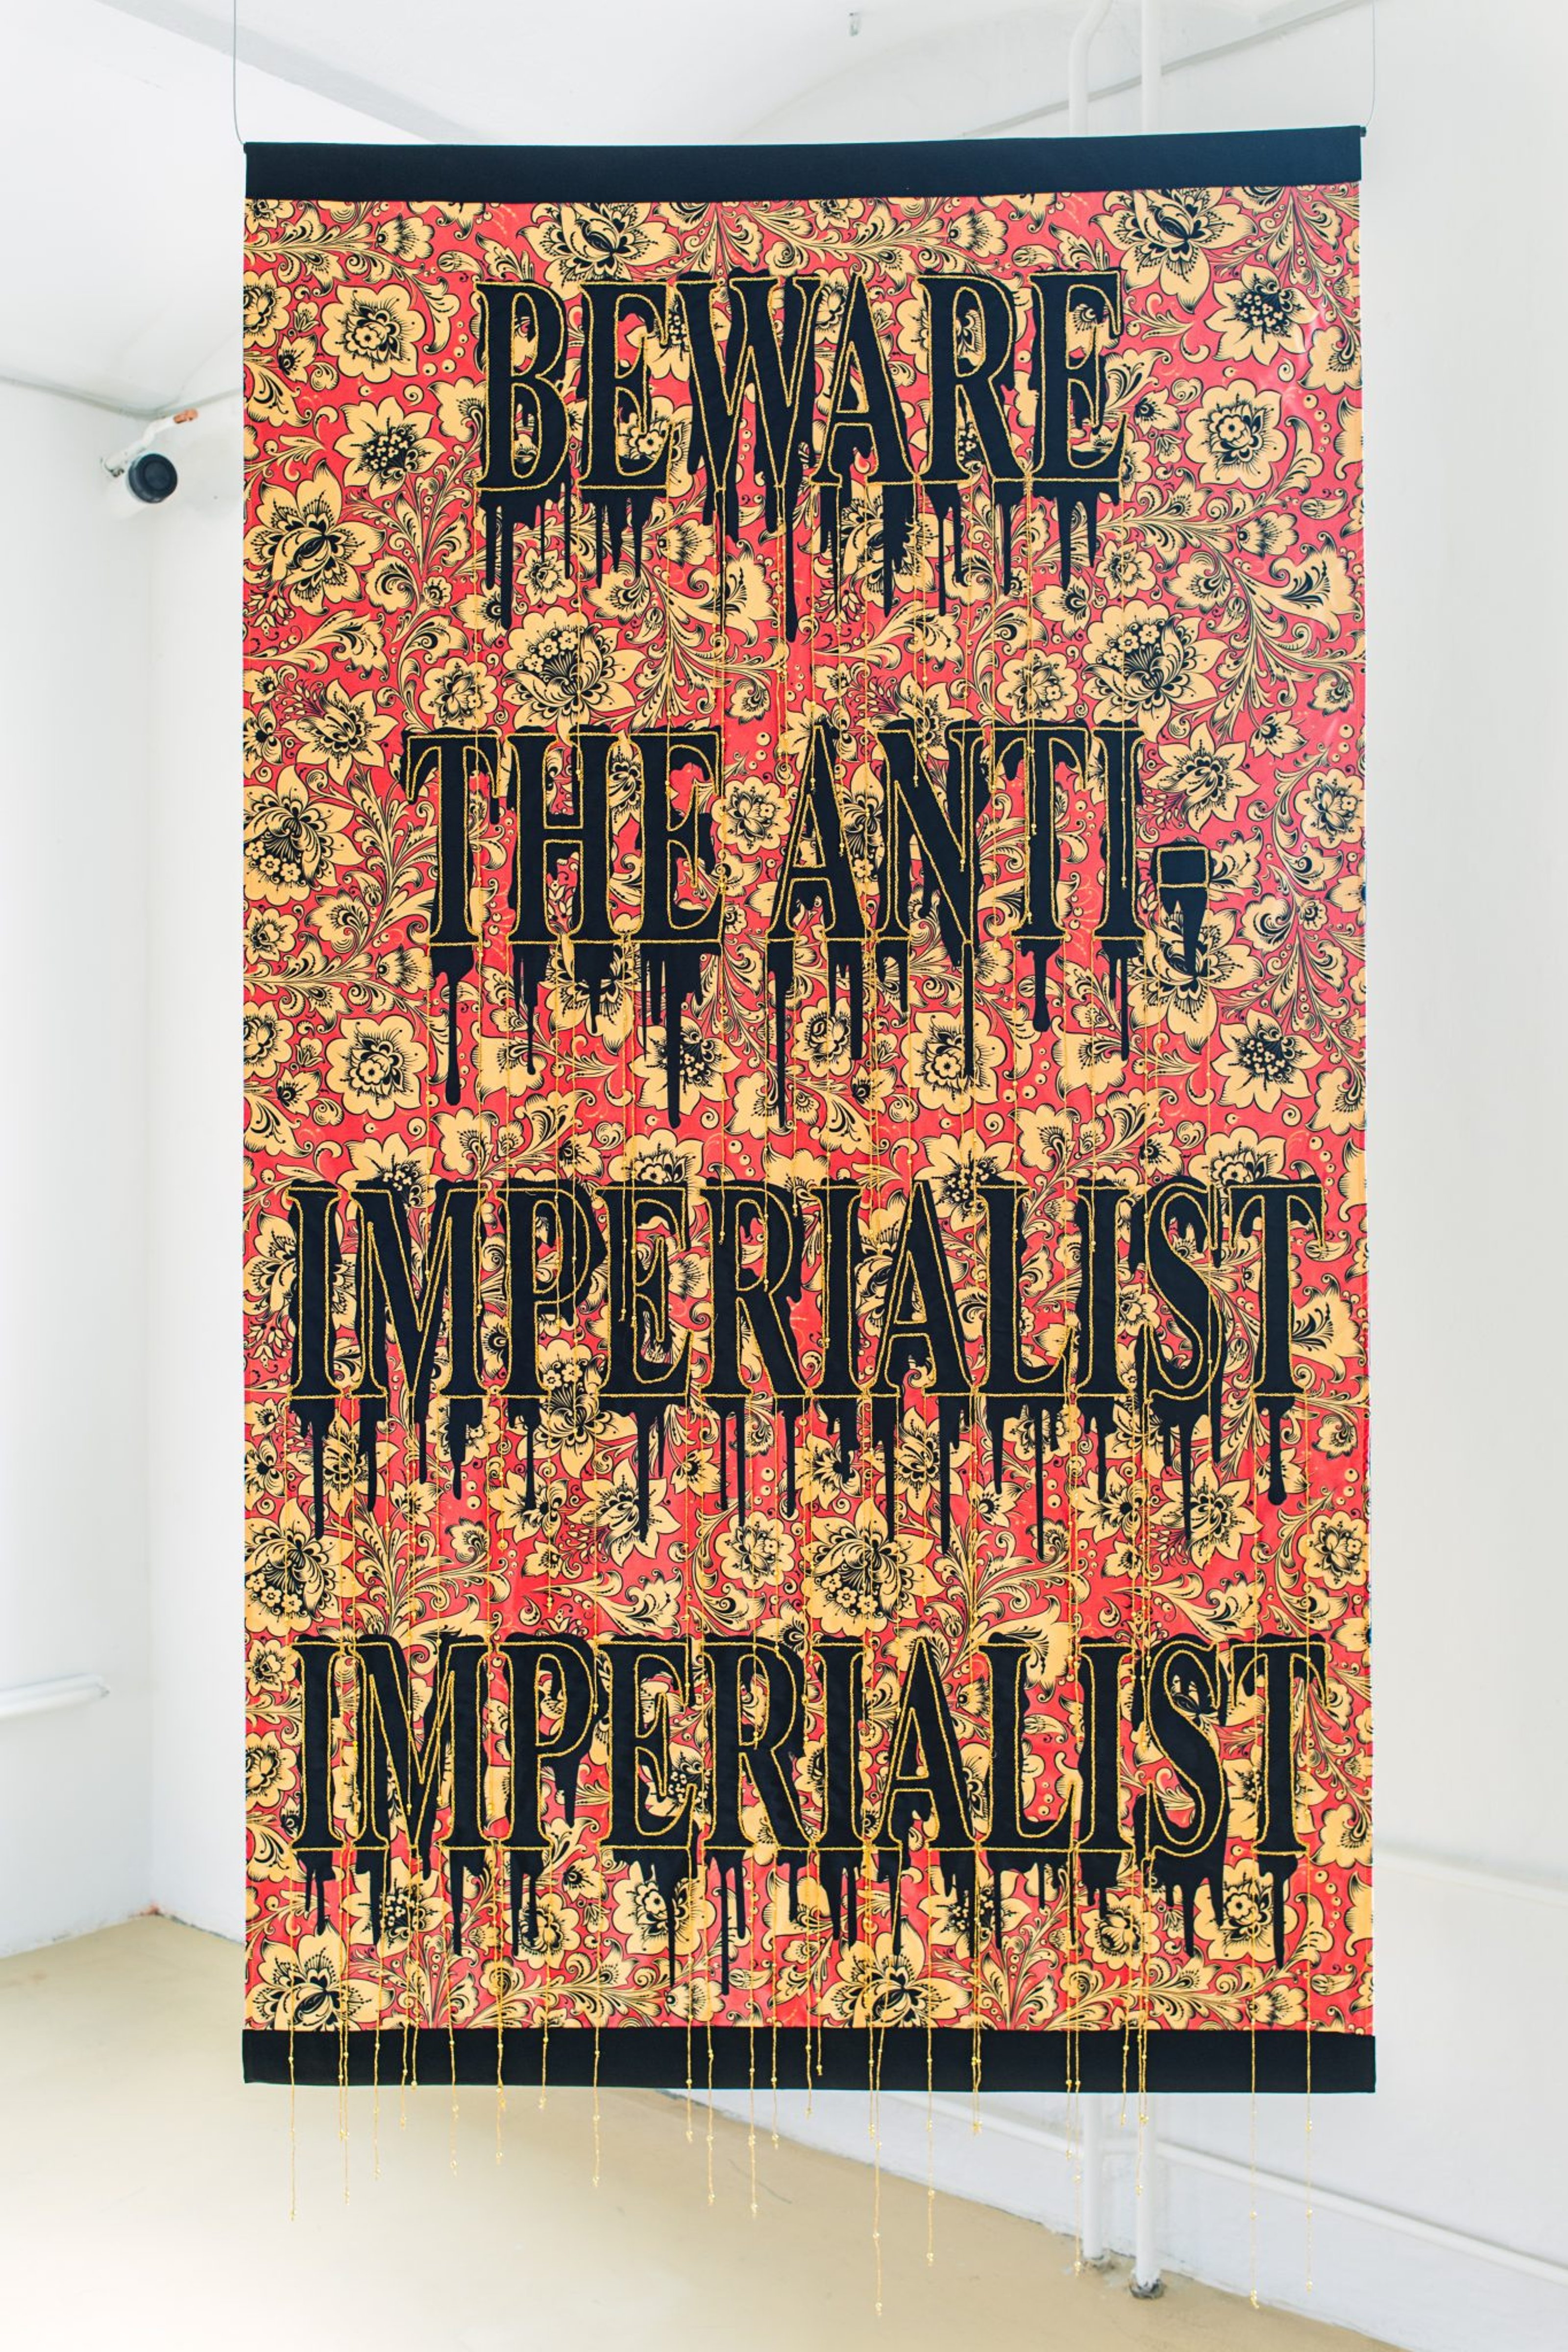 Artwork with the text Beware the anti imperialist imperialist referring to Russia and Iran